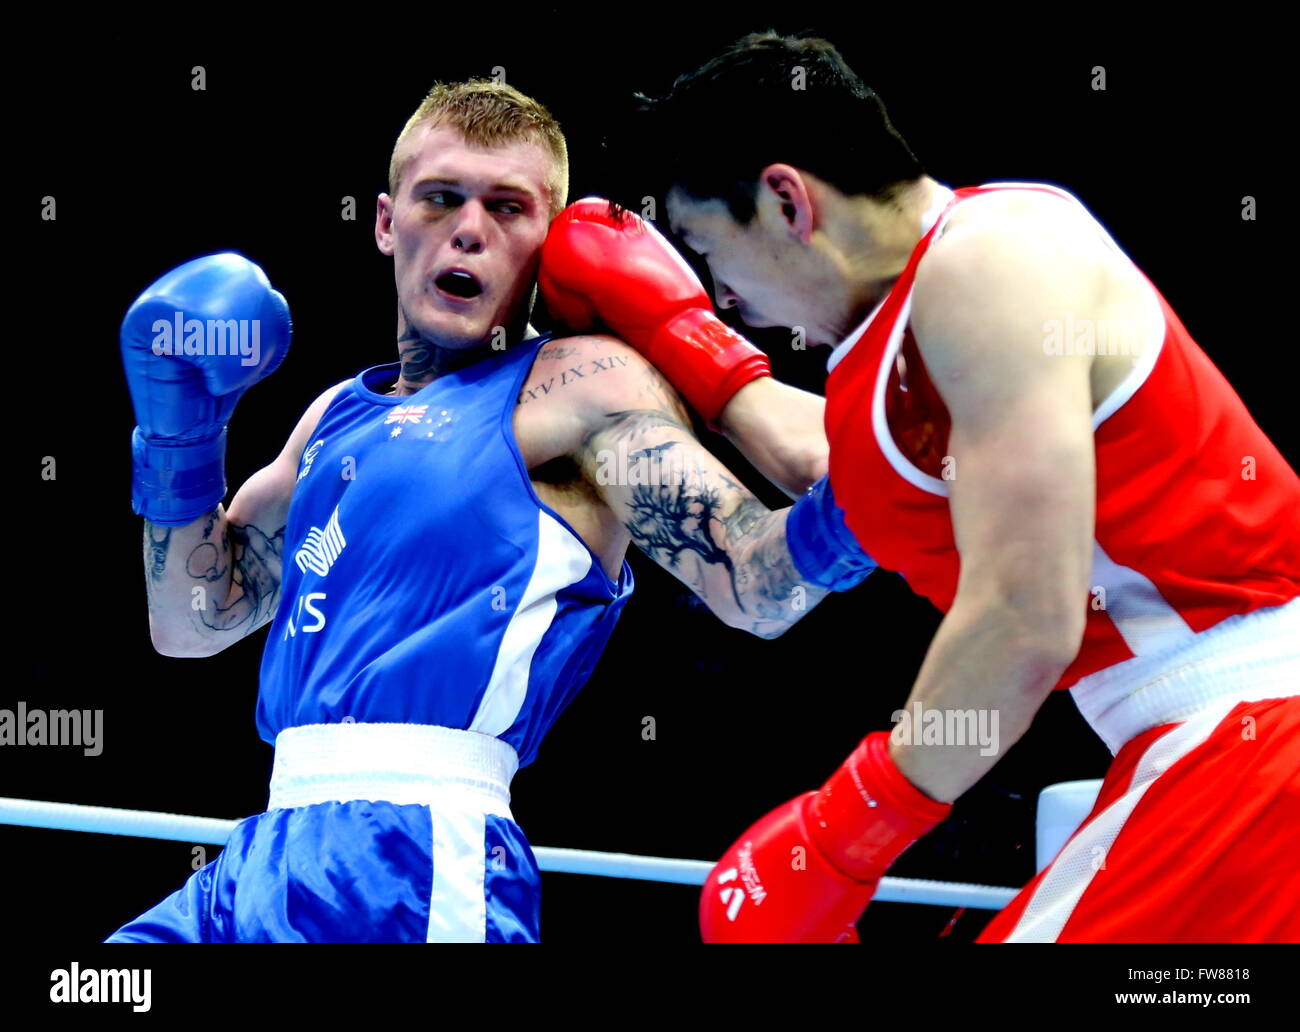 Qian'an, China's Hebei Province. 1st Apr, 2016. Daniel Jason Lewis (L) of Australia competes during the bronze medal match against Shinebayar Narmandakh of Mongolia in the men's 75kg category competition at the Asia/Oceania Zone boxing event qualifier for 2016 Rio Olympic Games in Qian'an, north China's Hebei Province, April 1, 2016. Lewis won 3-0. Credit:  Yang Shiyao/Xinhua/Alamy Live News Stock Photo